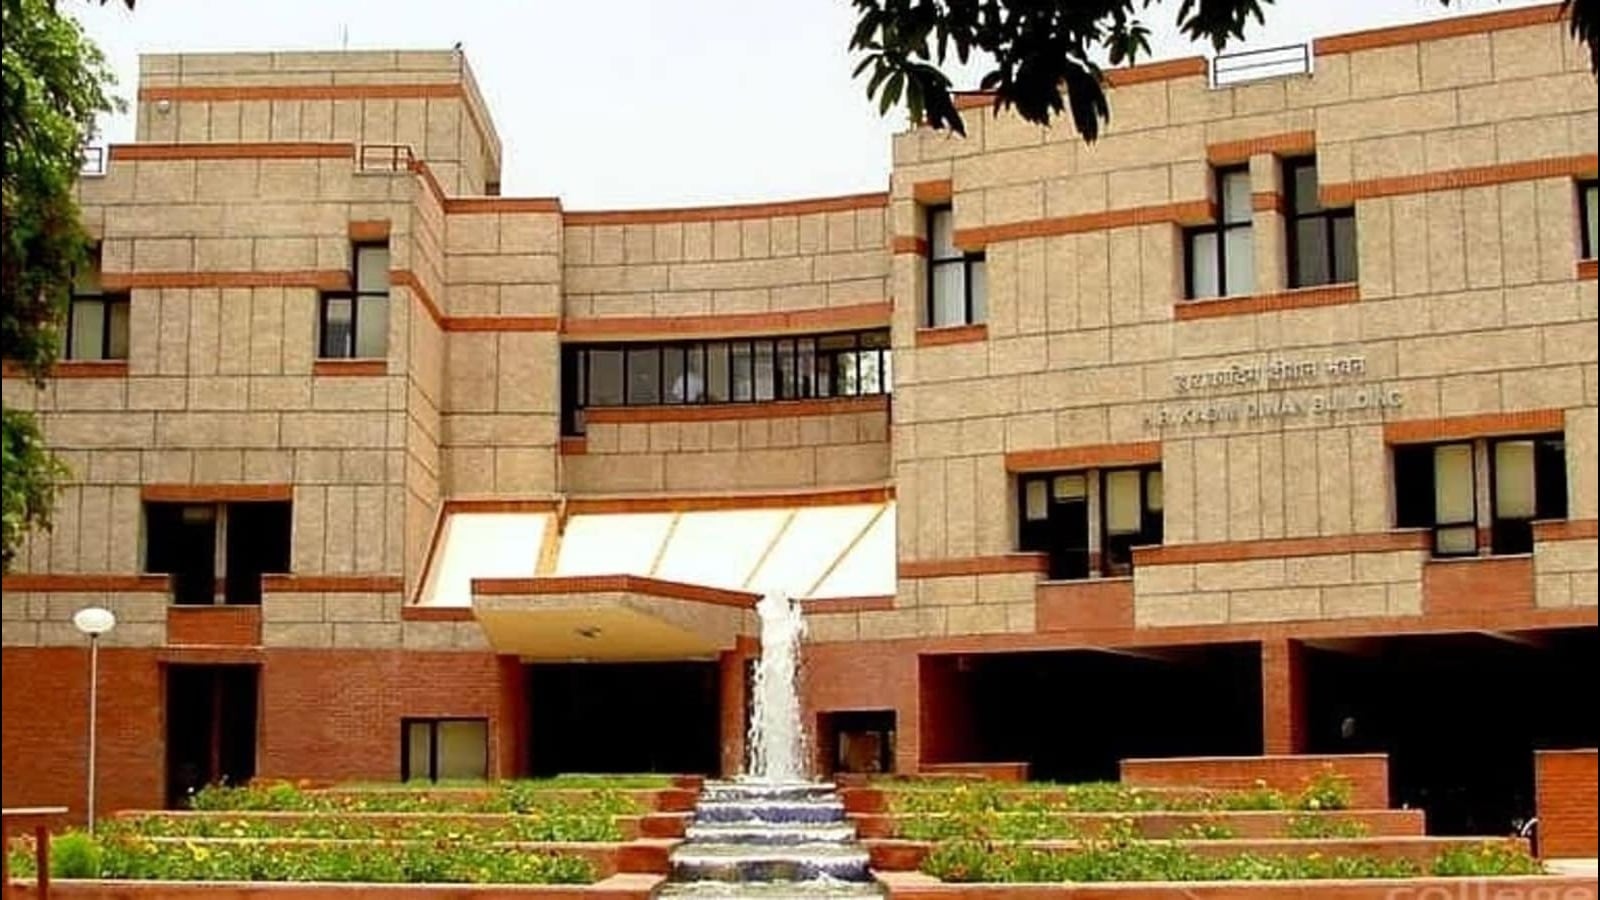 Workshop on Earthquake Resistant Practices for Architecture Students held at IIT Kanpur